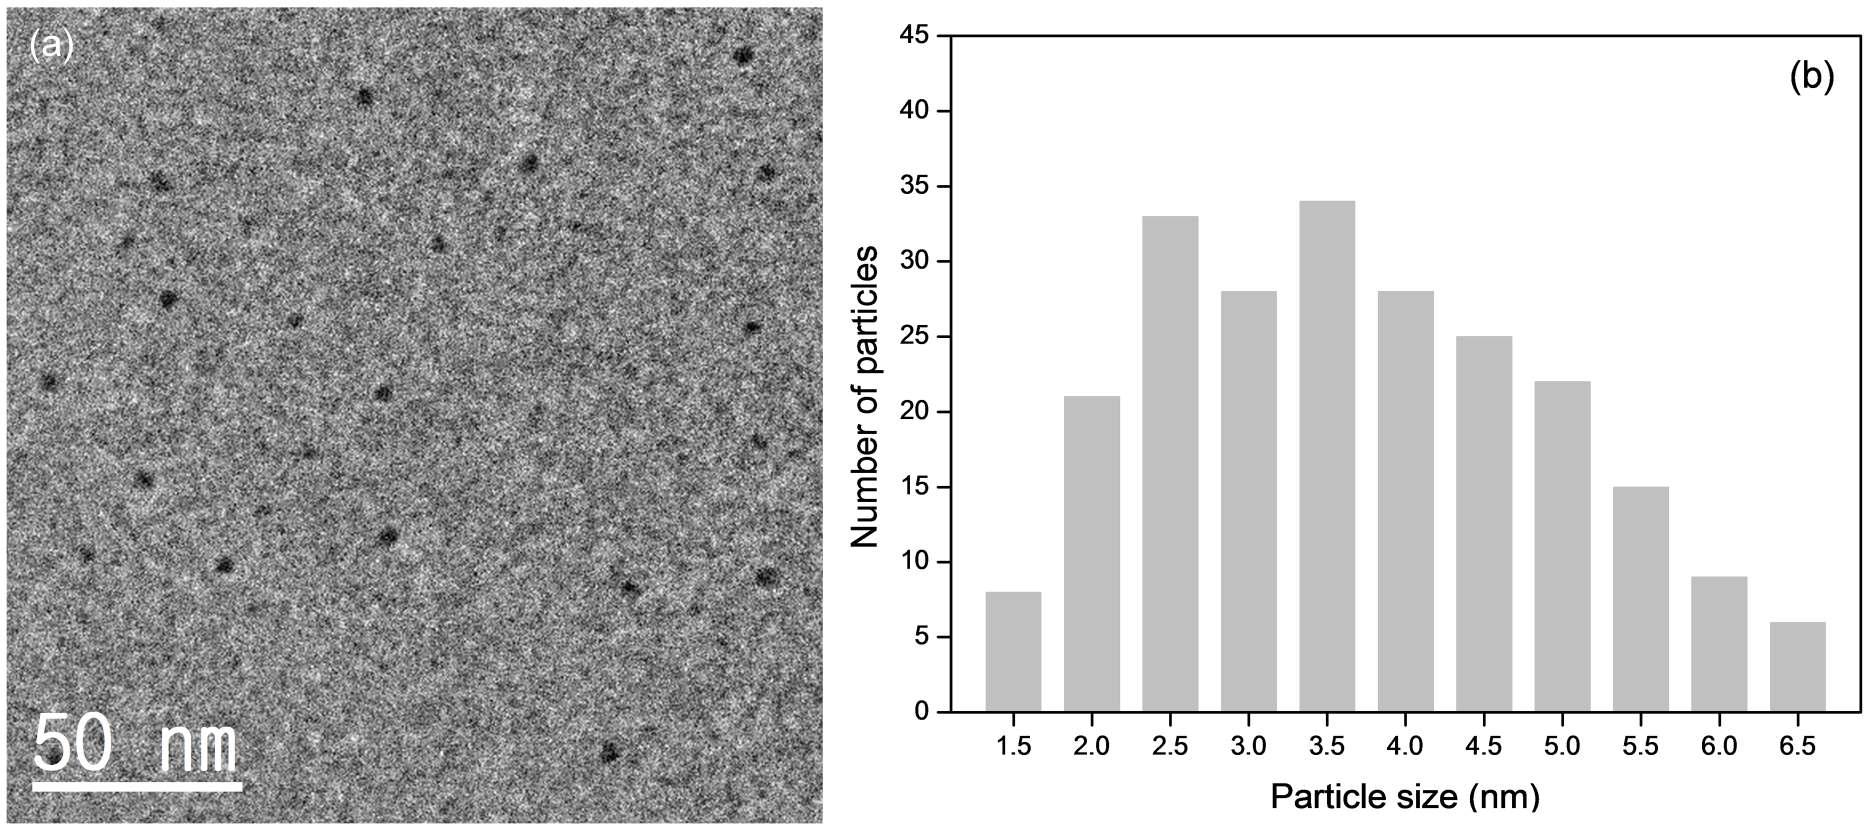 Bright field TEM image (a) and the size distribution of the nanoparticles (b).